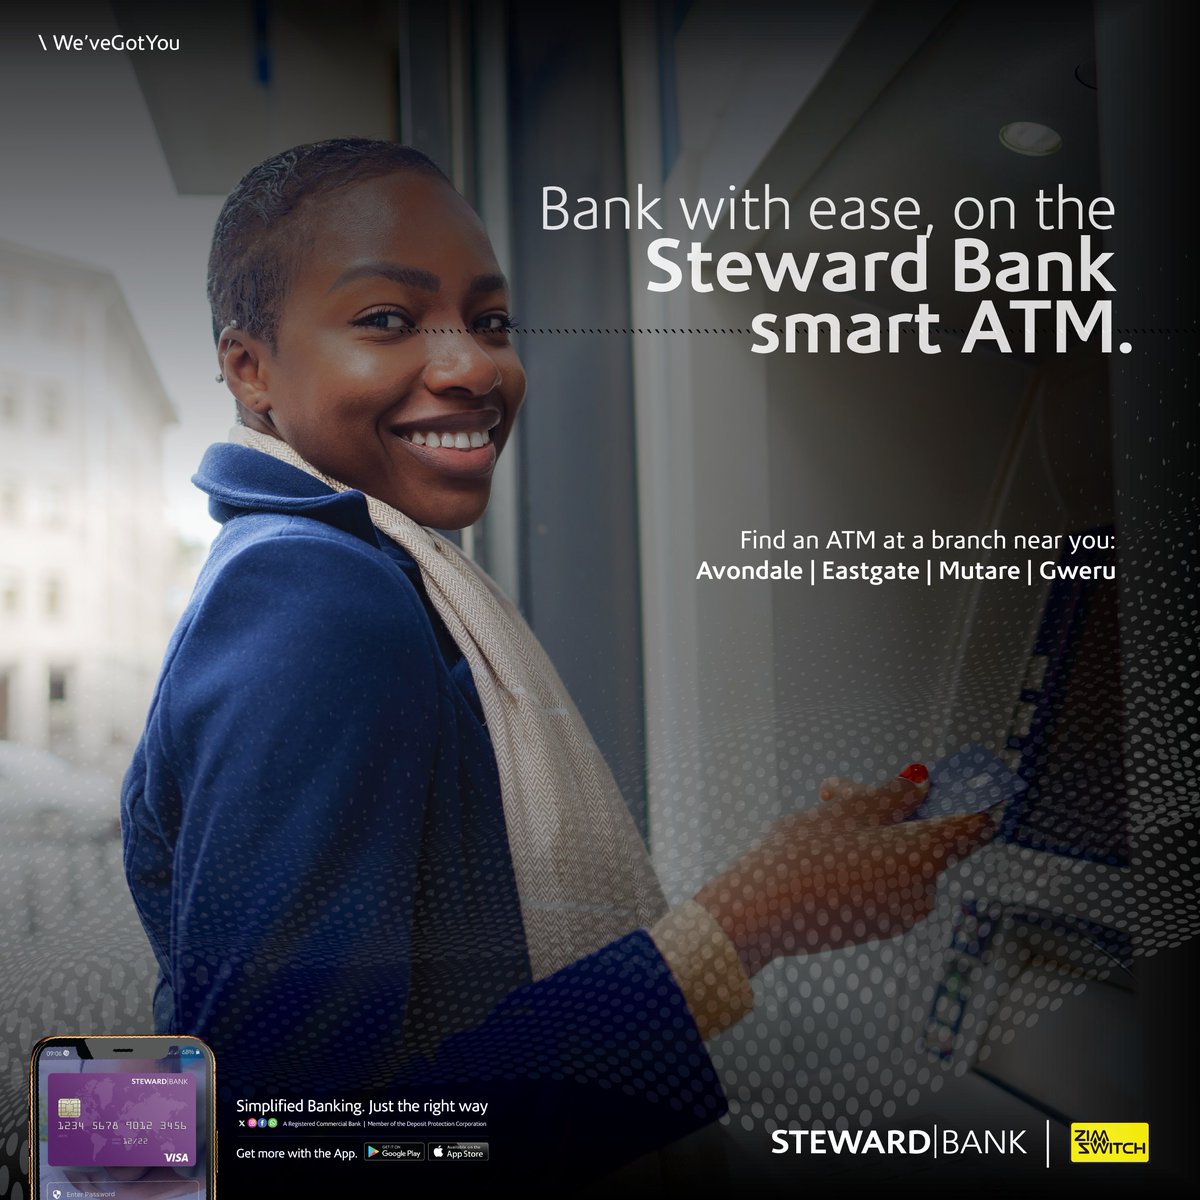 Bank with ease on the Steward Bank smart ATM! 🟪Locations: Avondale branch, Eastgate branch, Gweru branch and Mutare branch. ✅Withdraw USD cash, check balance, change PIN and more. #WeveGotYou